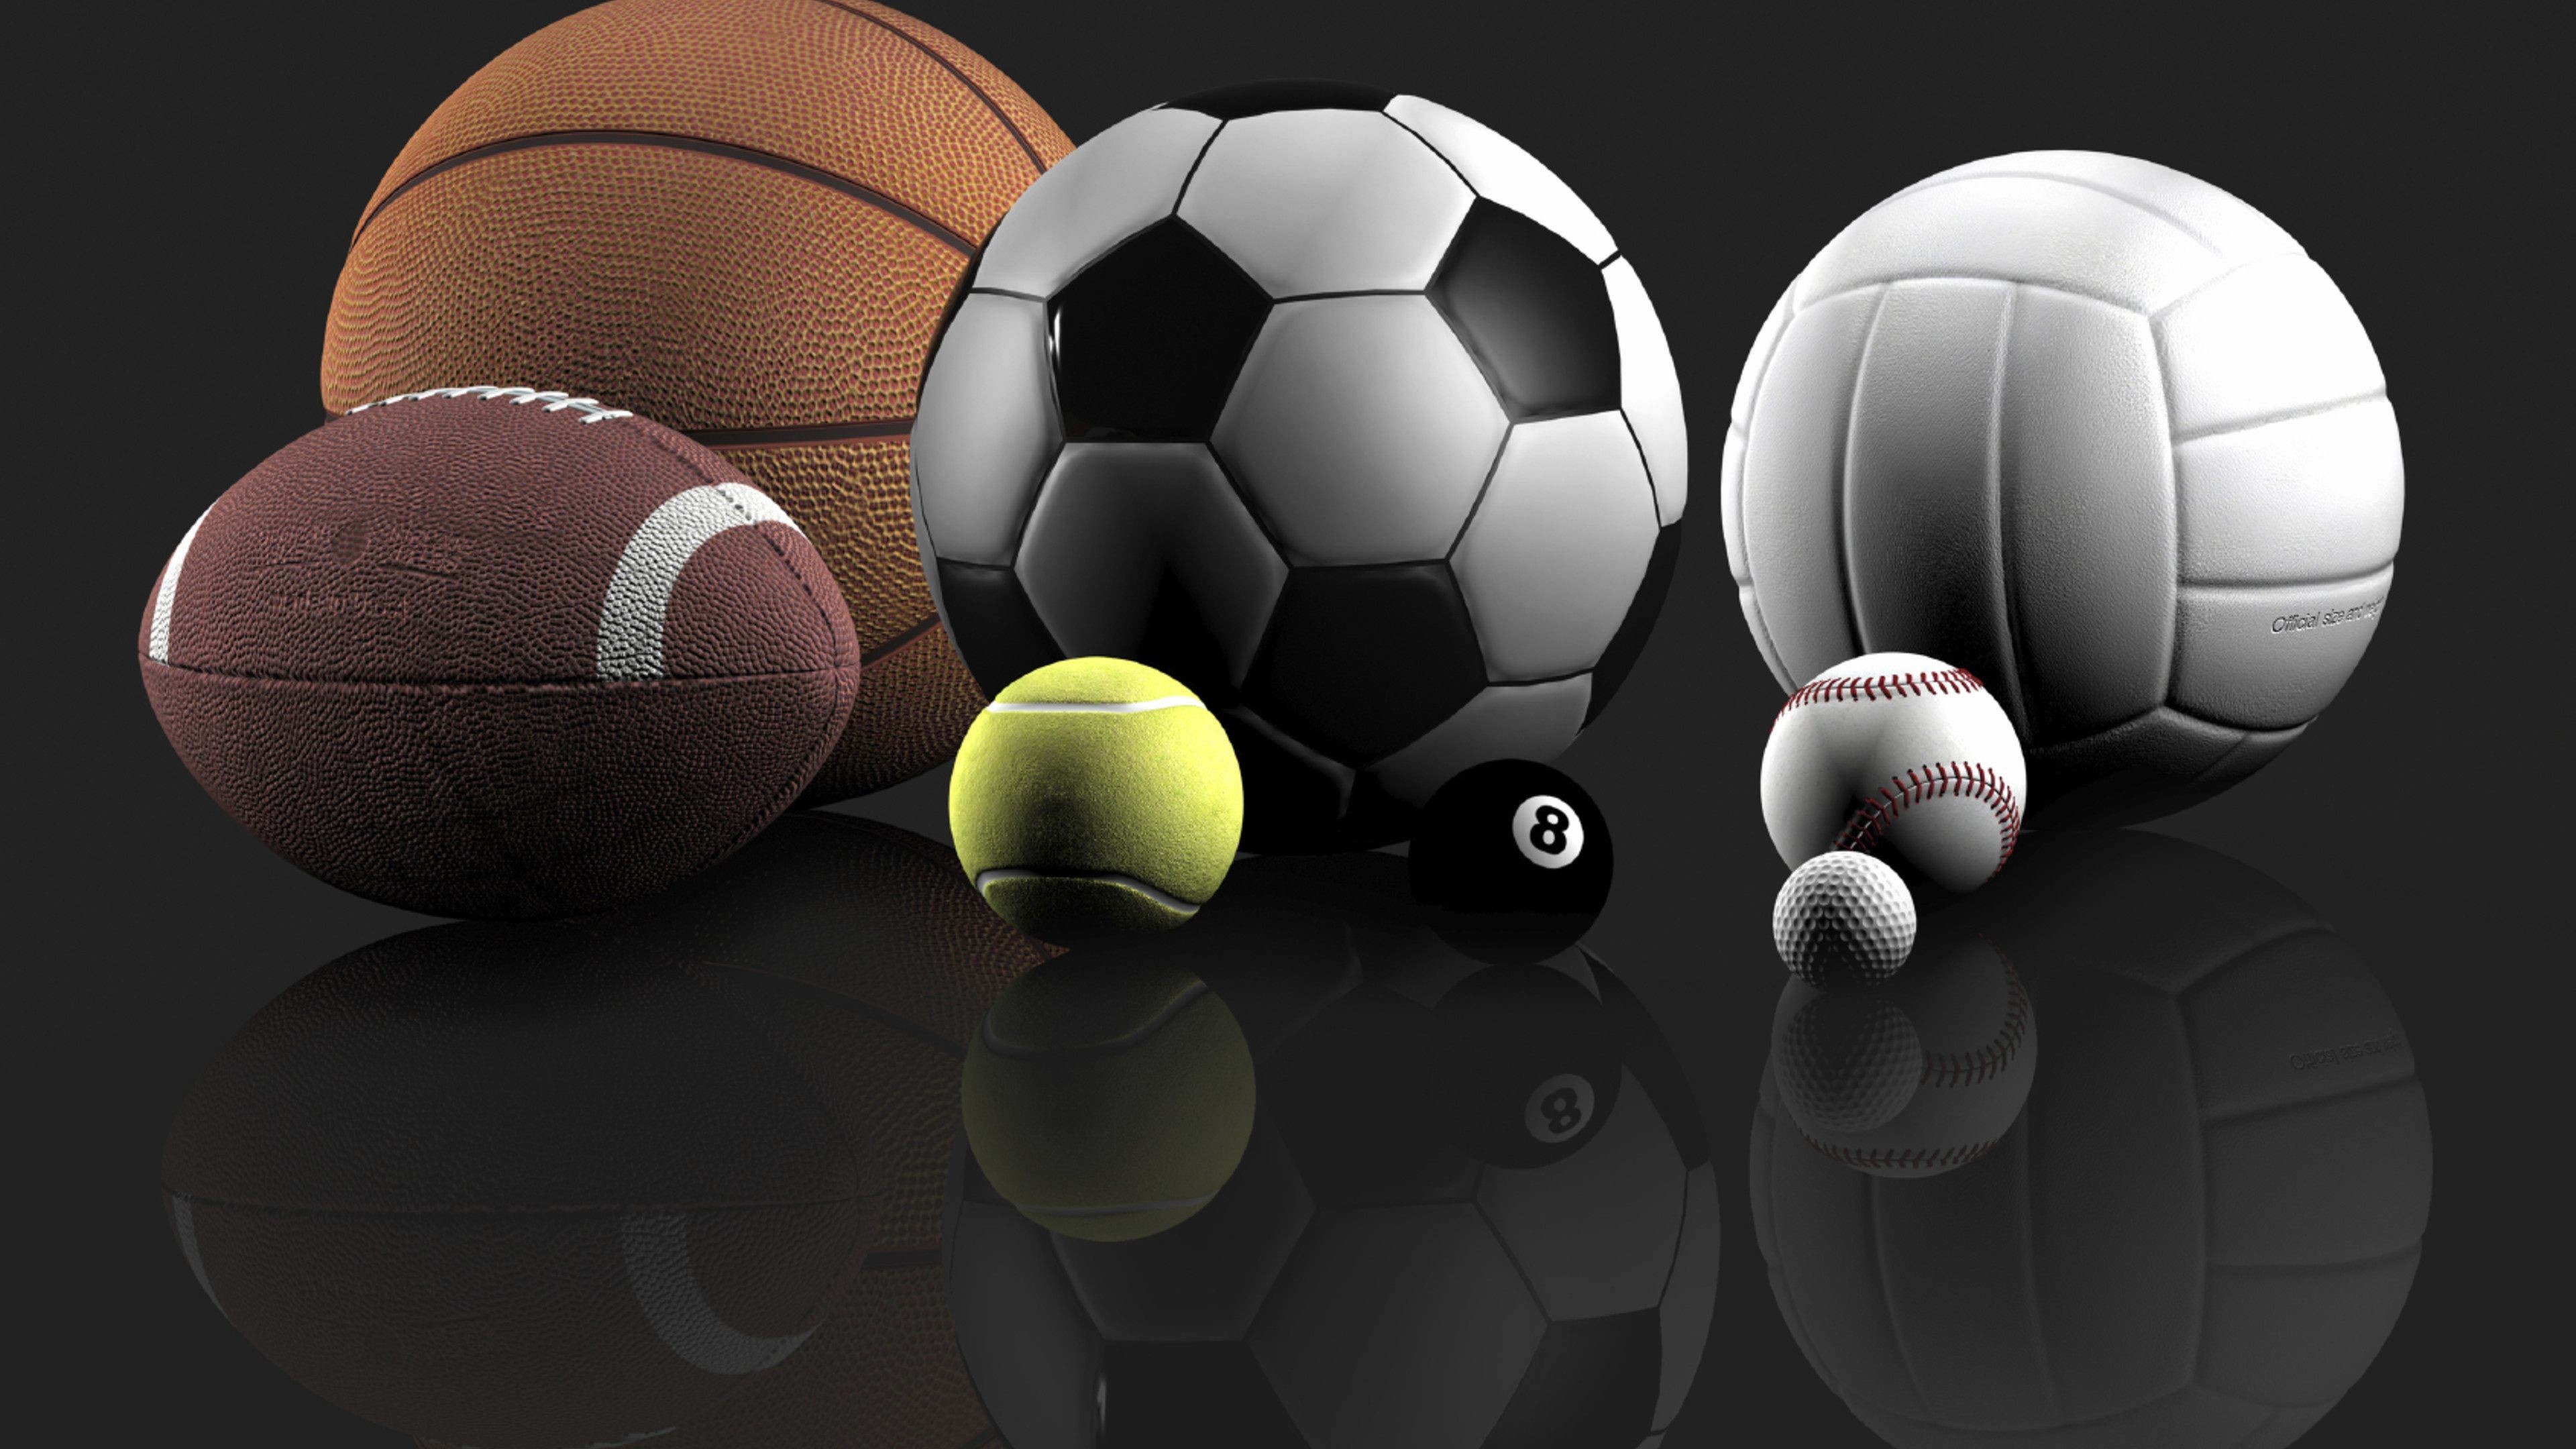 3840x2160 Sports HD Wallpapers Wallpaper Cave Source Â· Tags  Ball Category  Sports